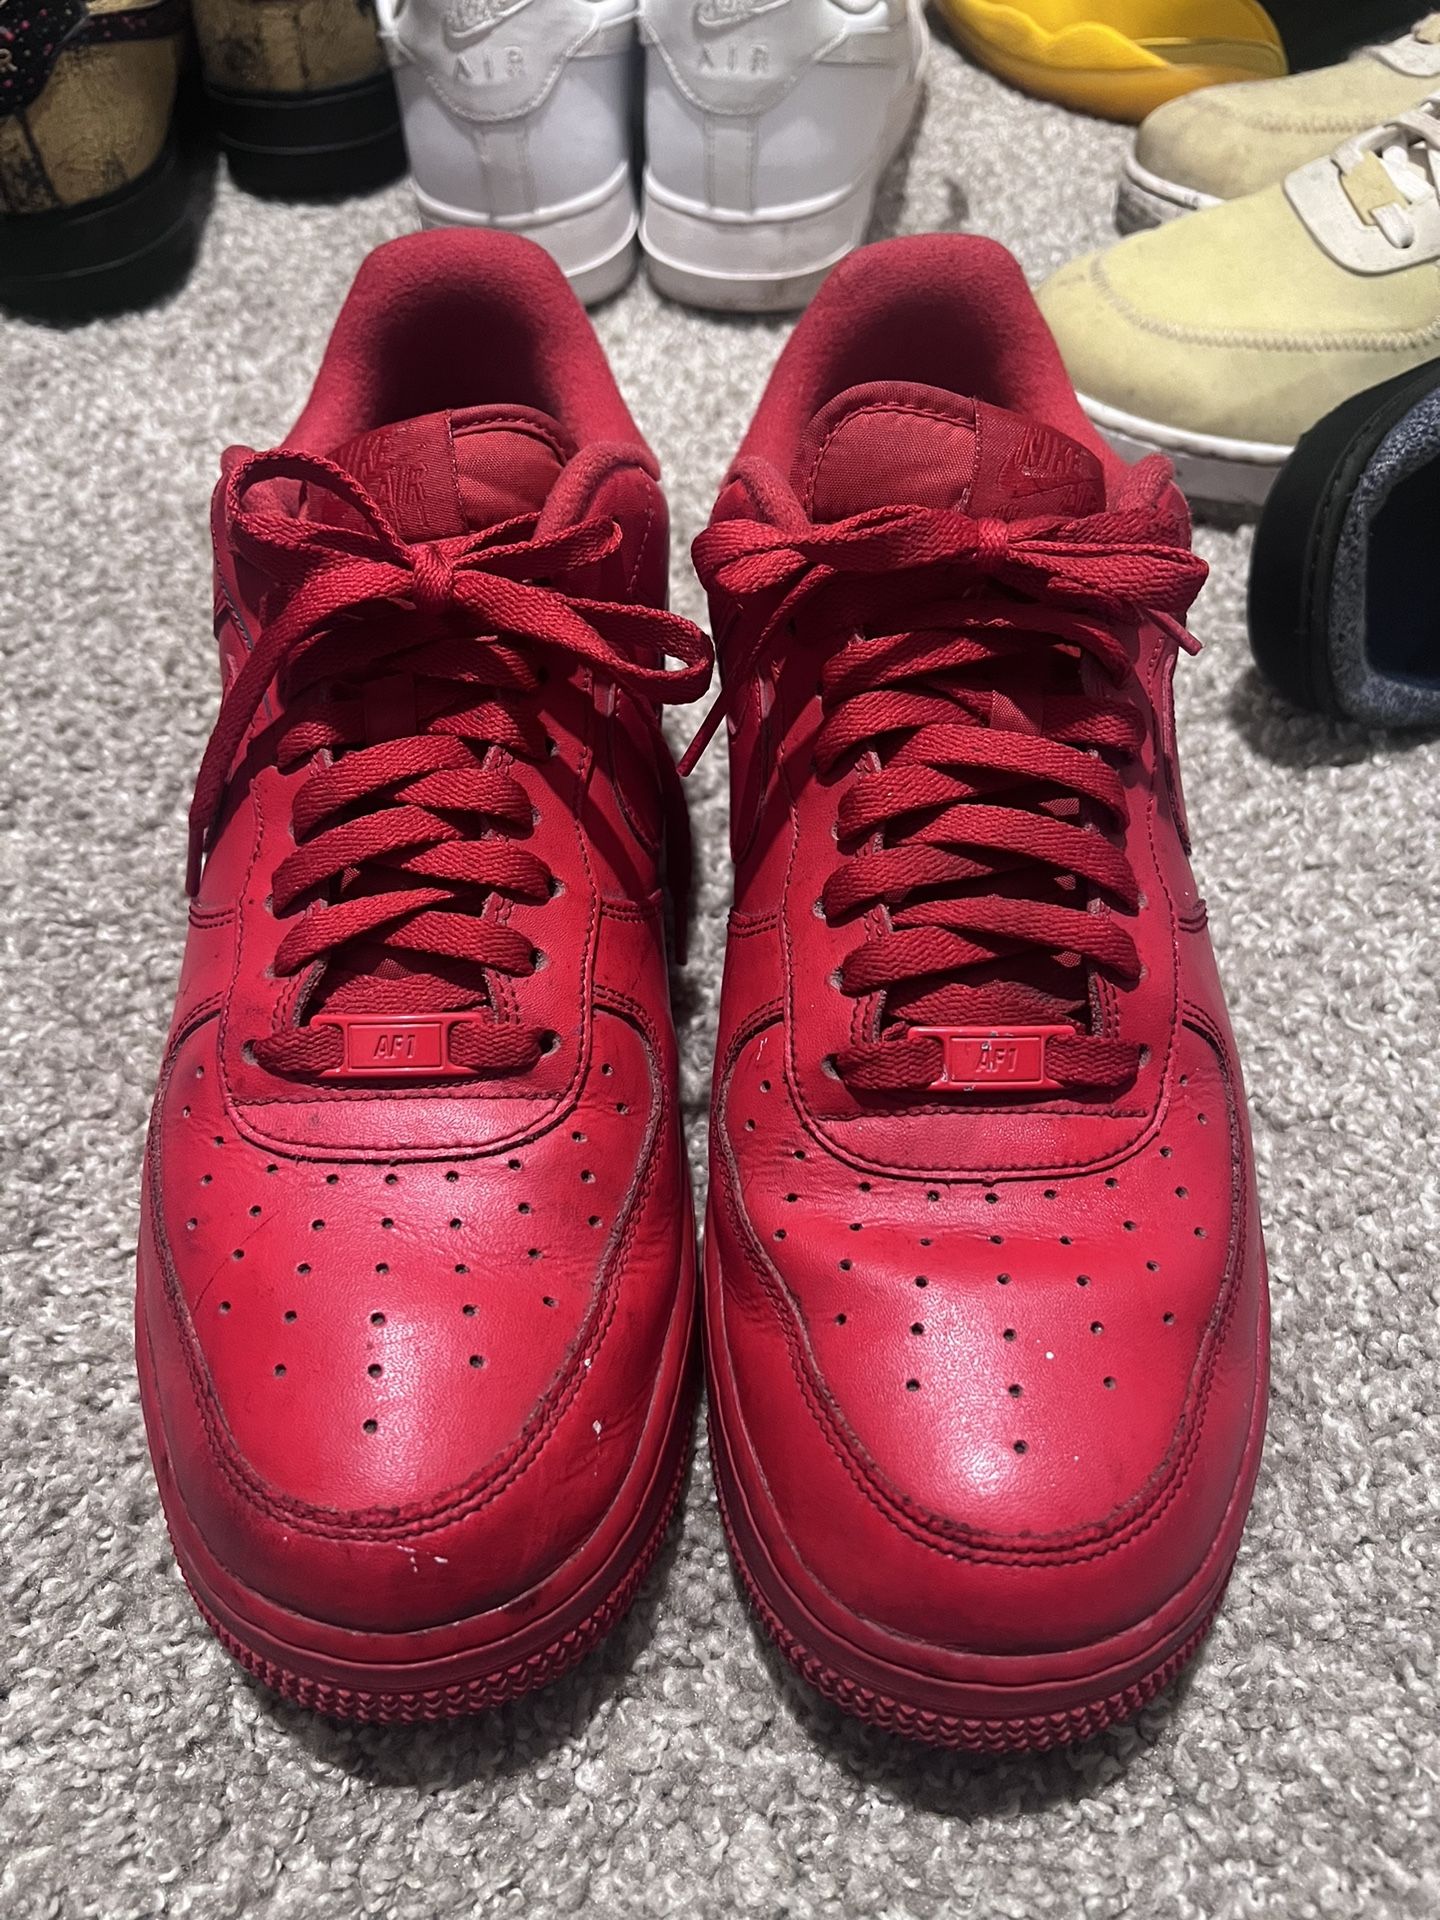 Red Air Ones